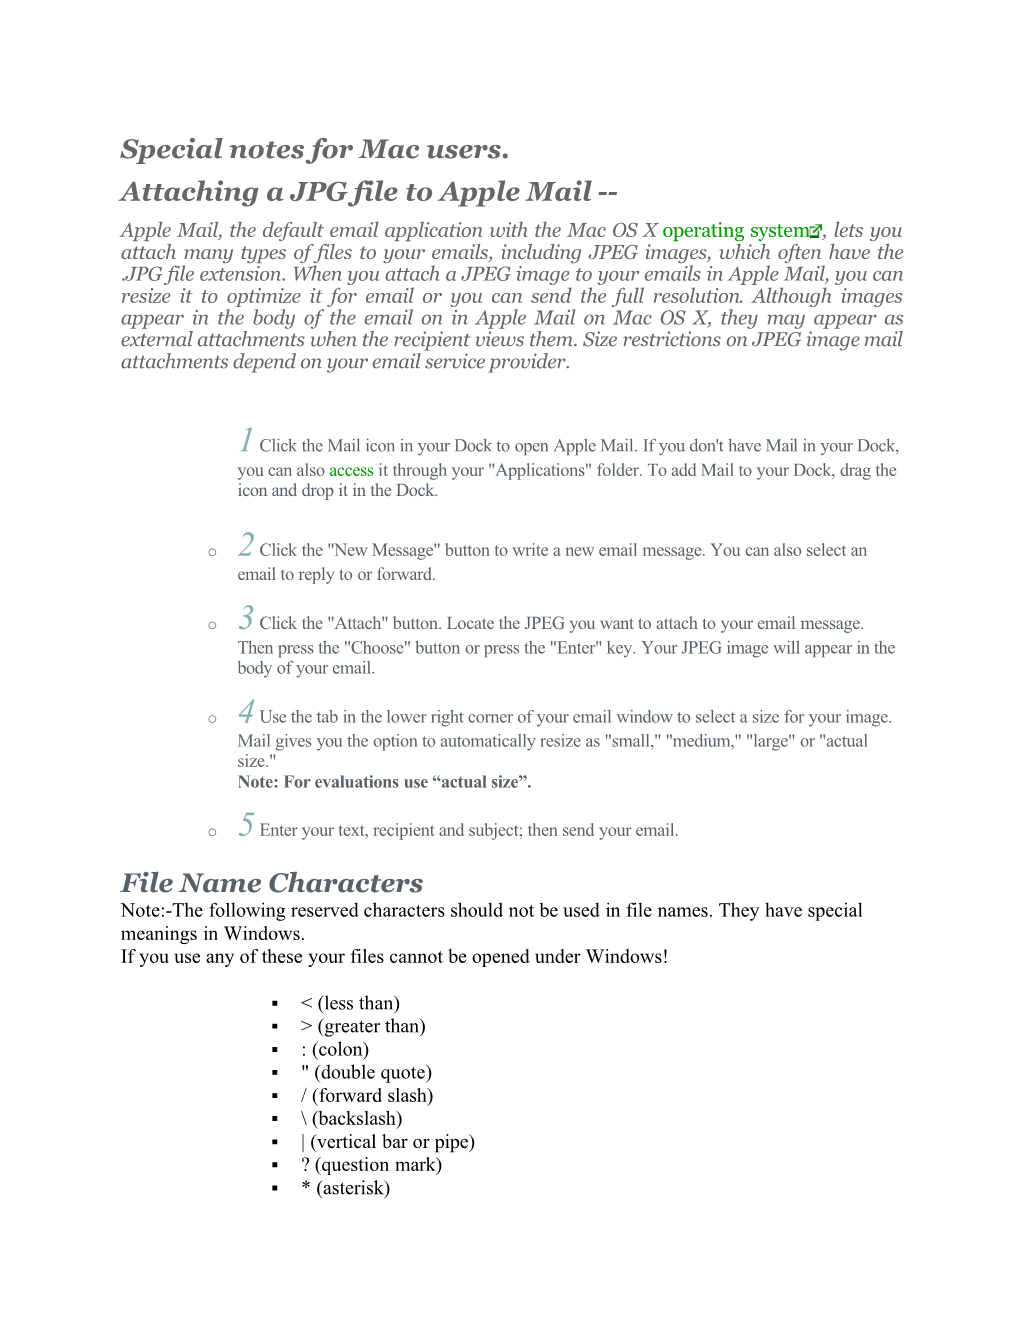 Special Notes for Mac Users. Attaching a JPG File to Apple Mail -- File